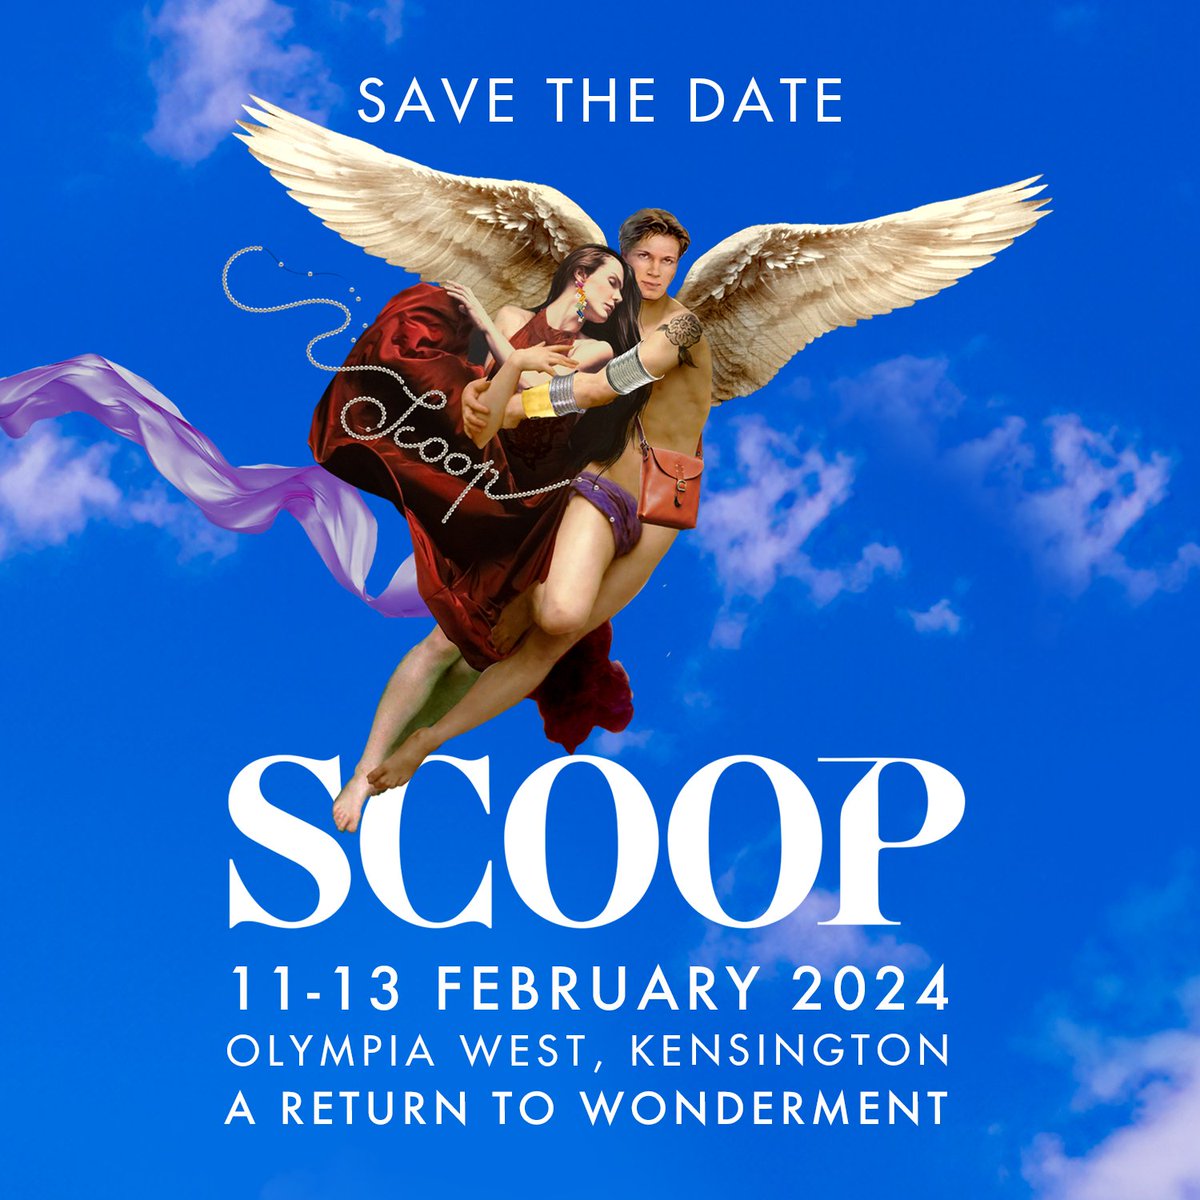 We are returning to wonderment at Scoop, 11th-13th February 2024, with a delightful roster of the best premium and contemporary collections. Join us for a truly wonderful showcase of emerging designers and innovators.
#returntowonderment #uncovertheexceptional #scoopinternational